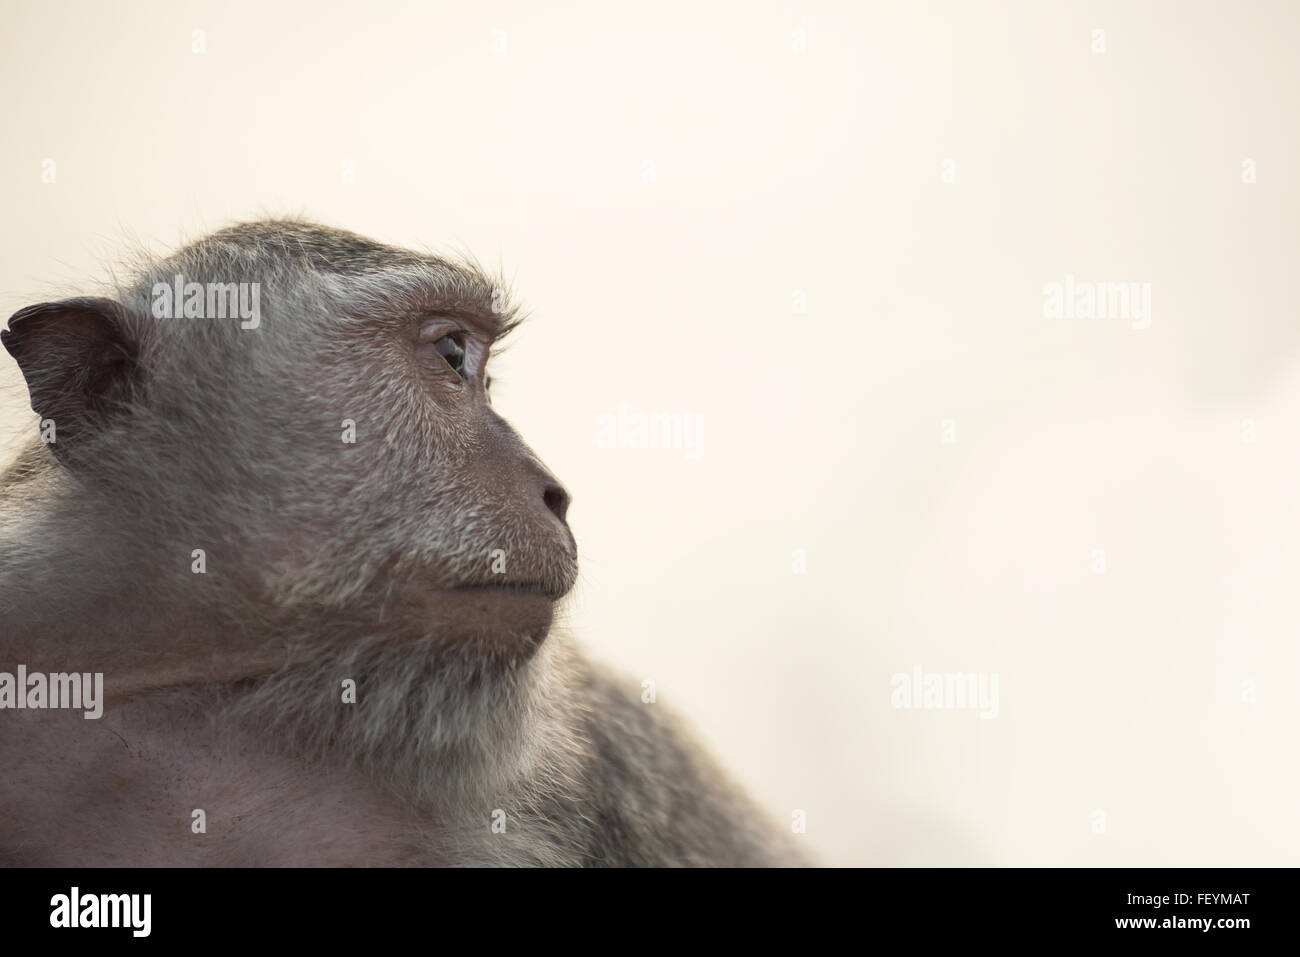 Wild monkey face profile portrait looking at distance with sky background. Wildlife conservation and animal rights campaign. Stock Photo